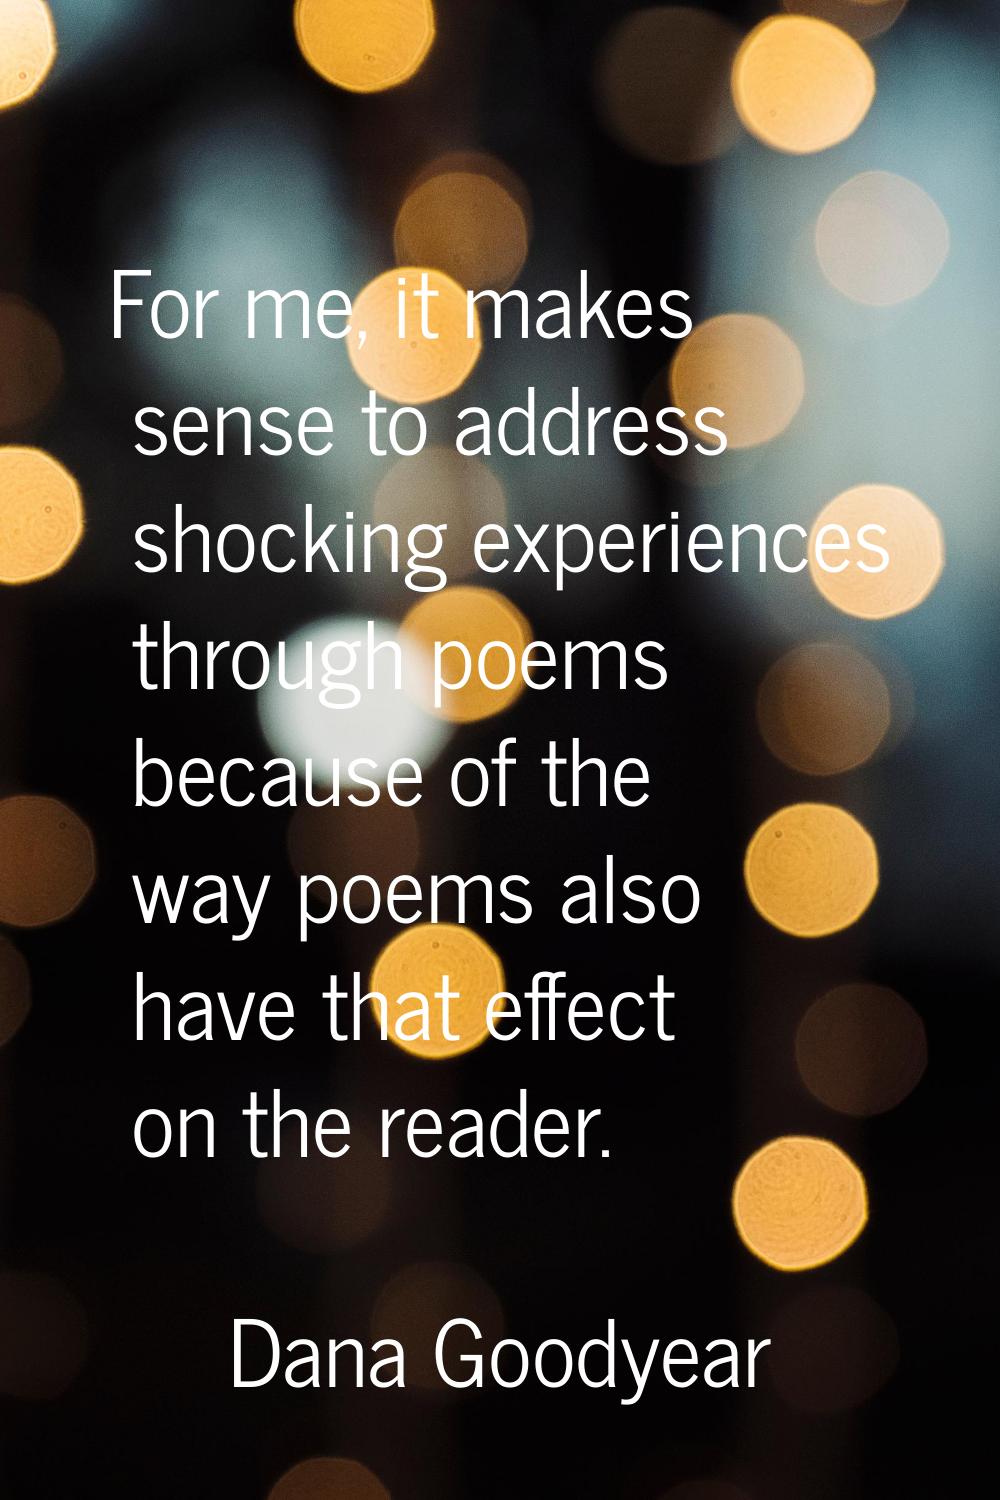 For me, it makes sense to address shocking experiences through poems because of the way poems also 